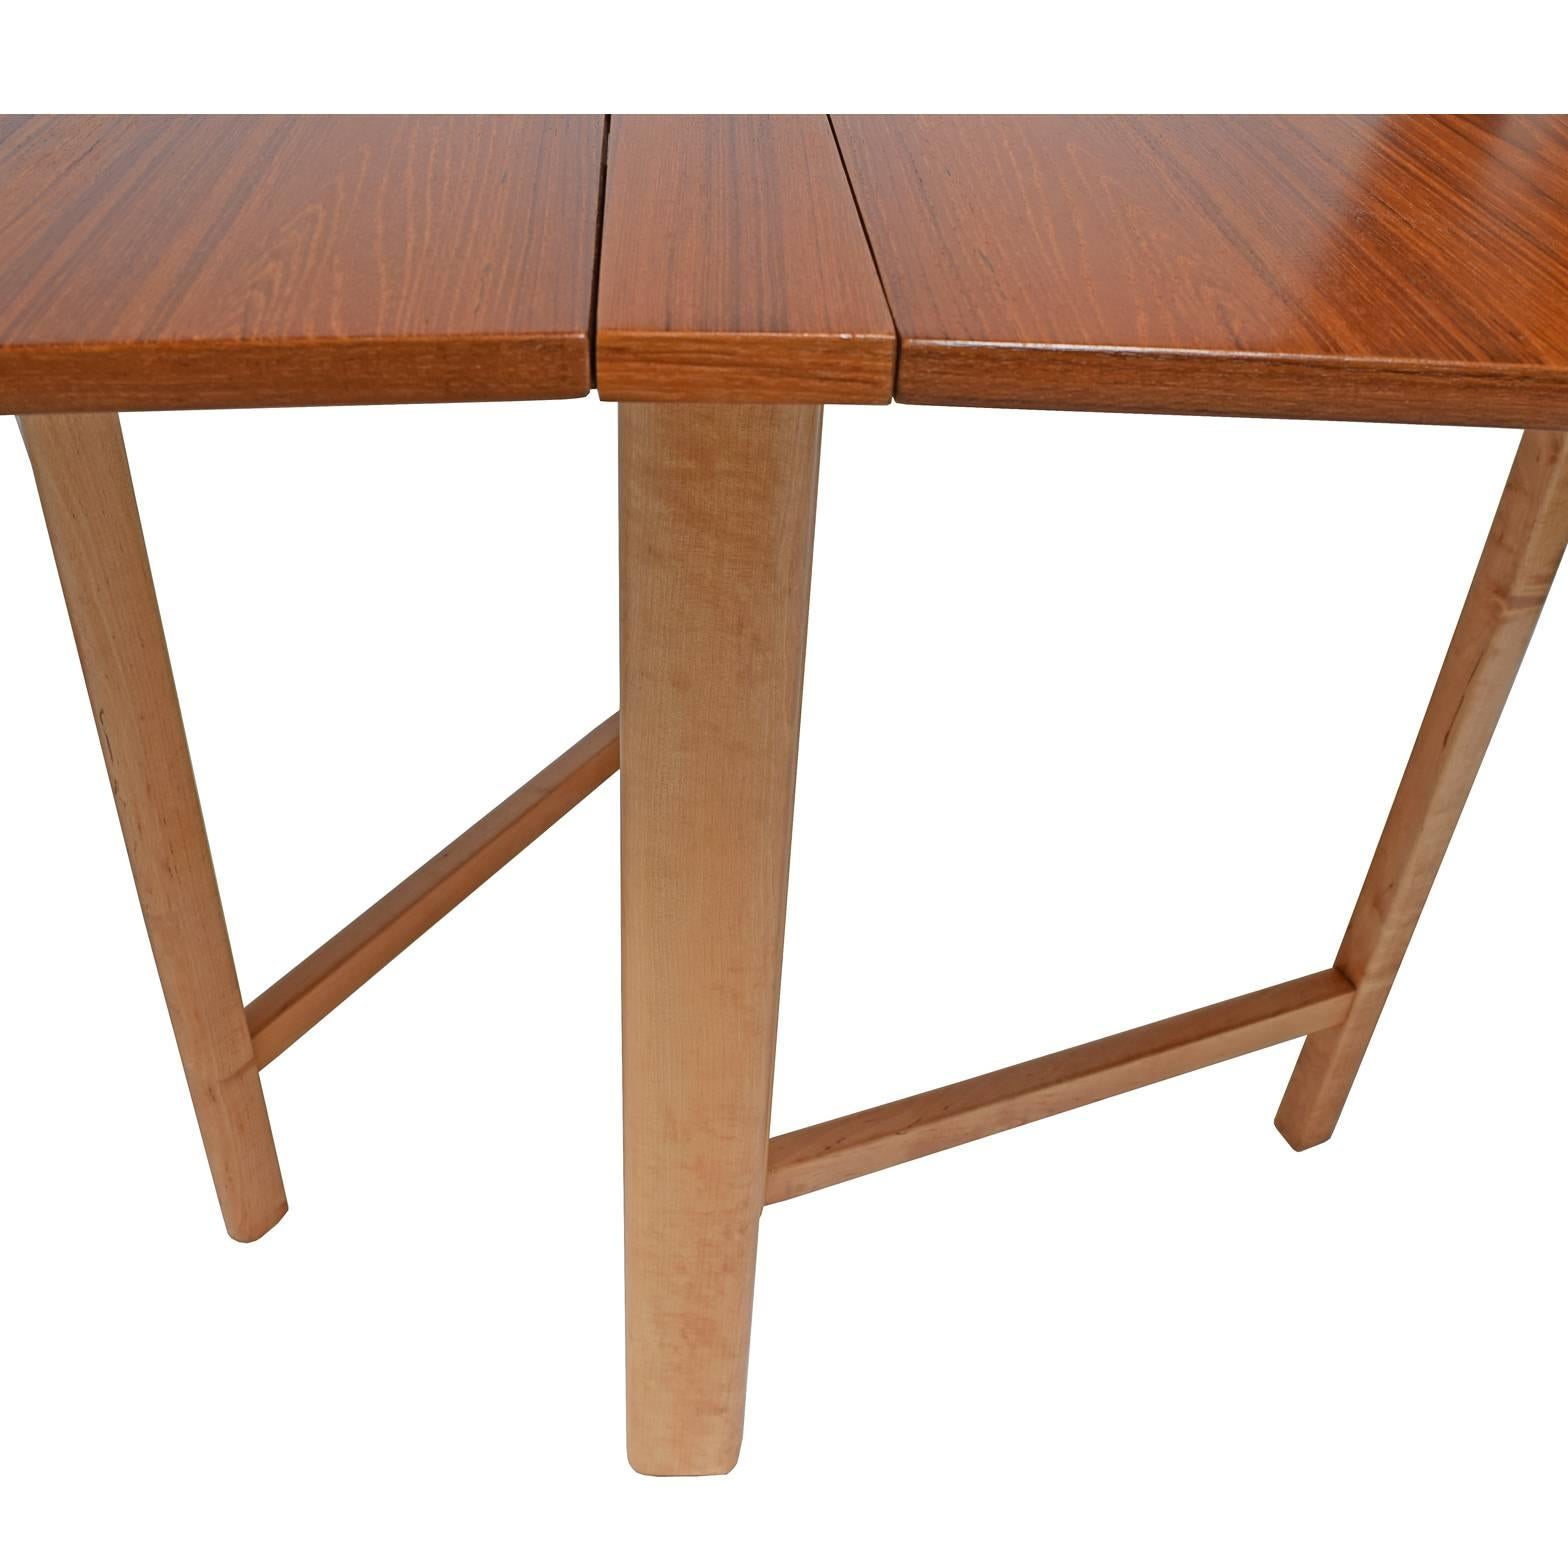 Mid-20th Century Signed Bruno Mathsson 'Maria' Expandable Dining Table for Karl Mathsson, 1961